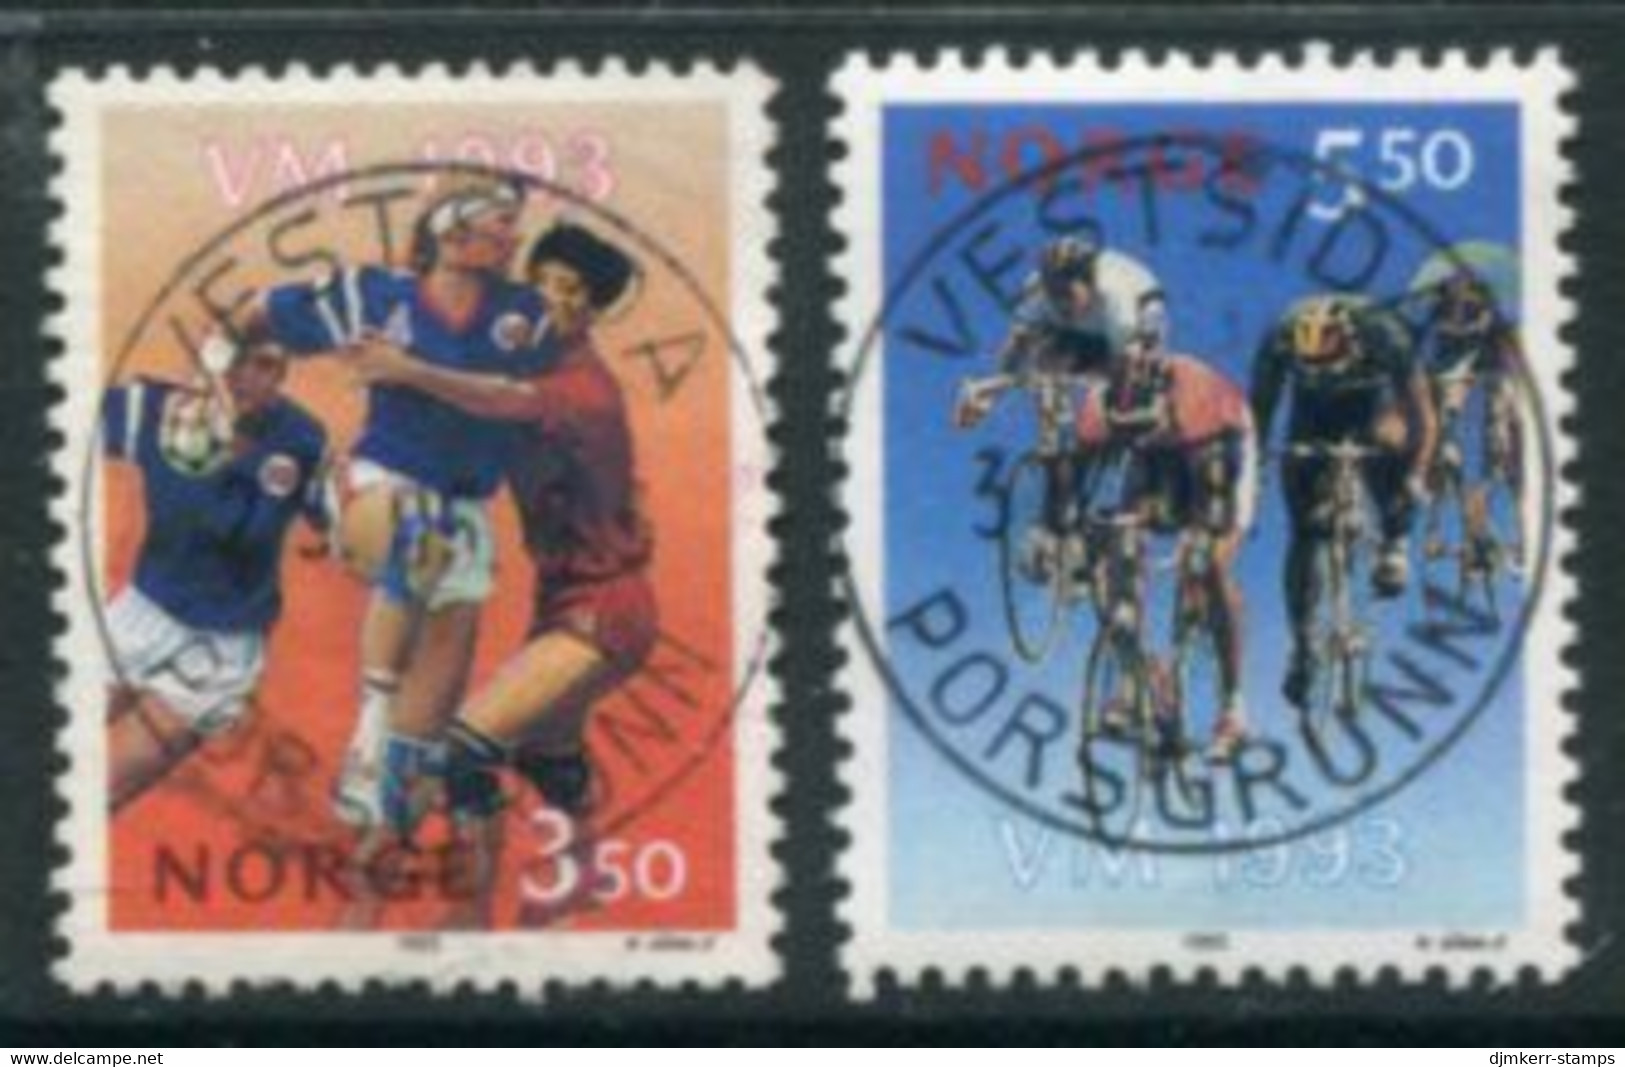 NORWAY 1993 Sports Championships Used   Michel 1129-30 - Used Stamps